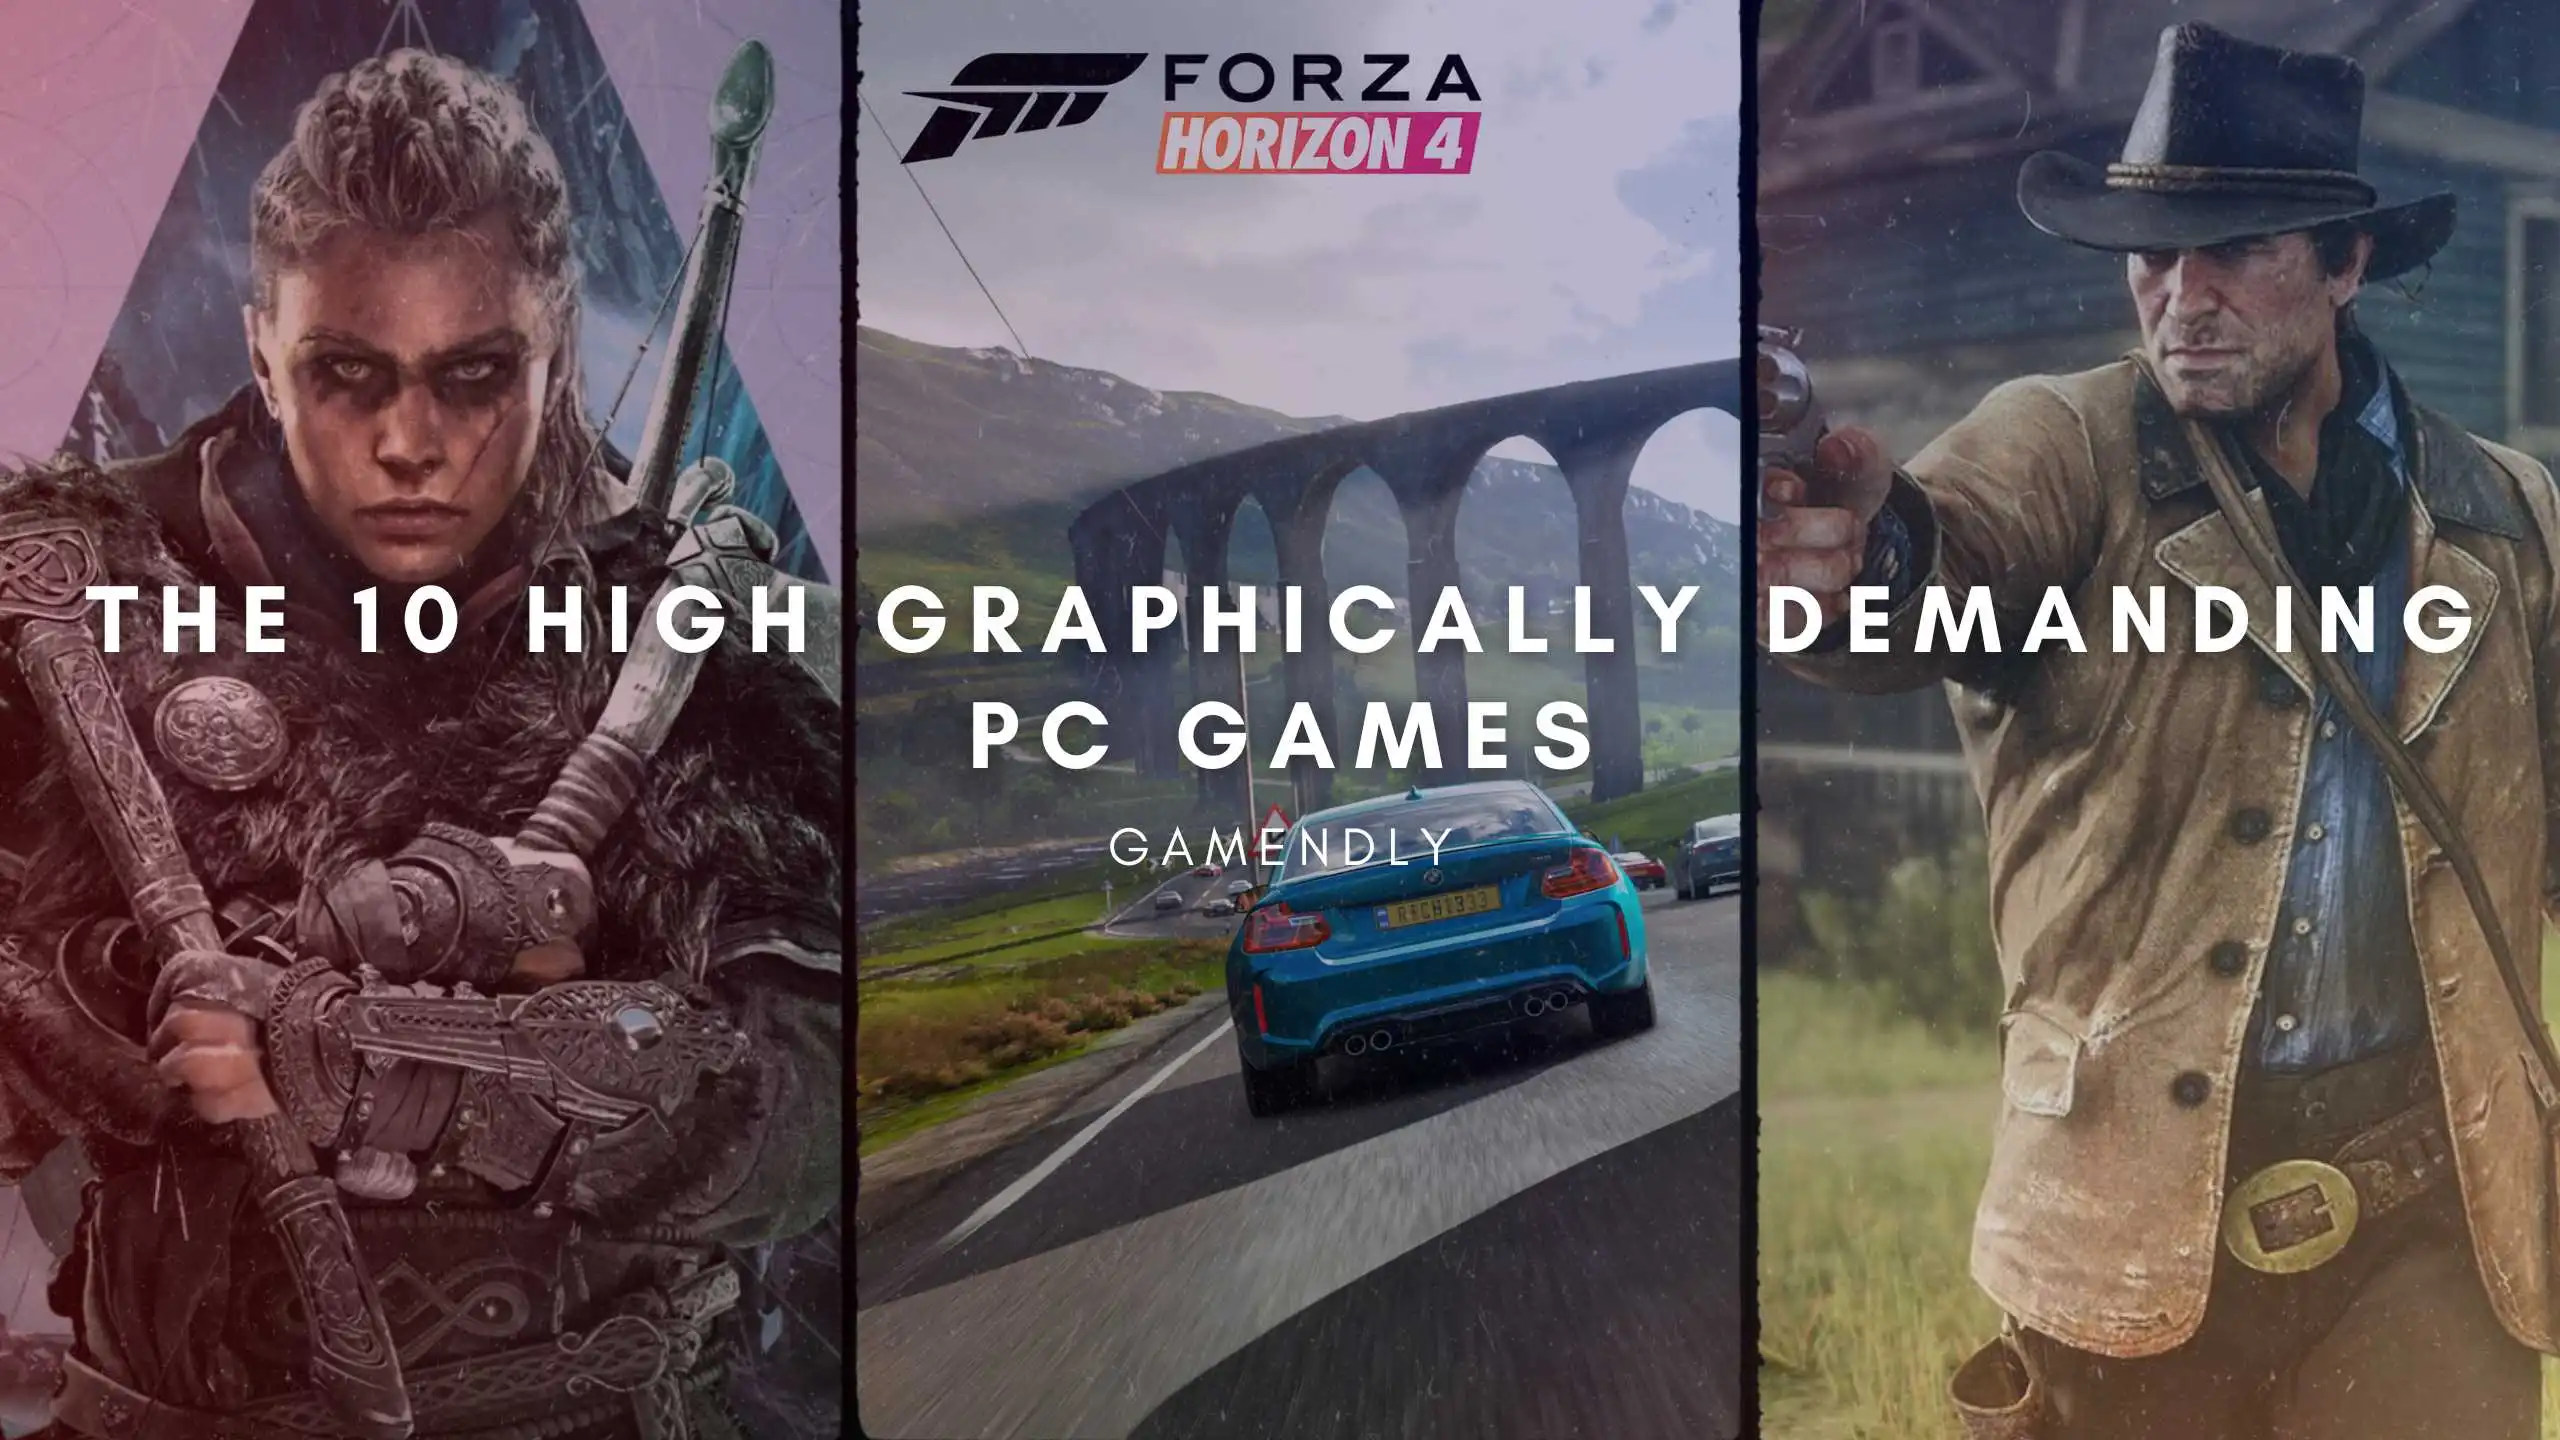 The 10 High Graphically Demanding PC Games